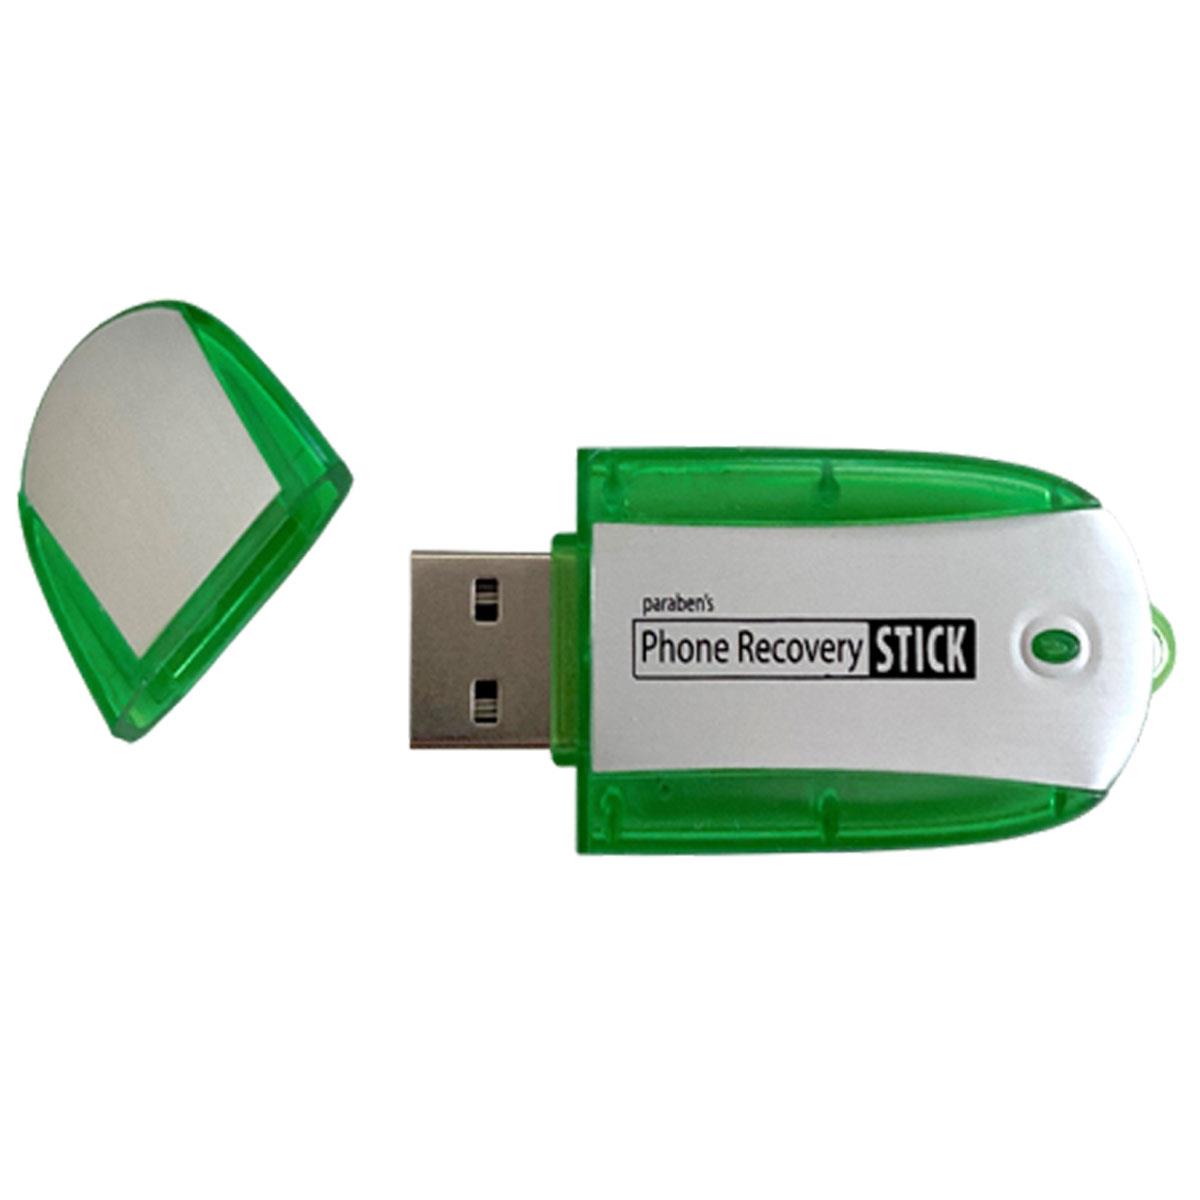 Image of Paraben Phone Recovery Stick for Android